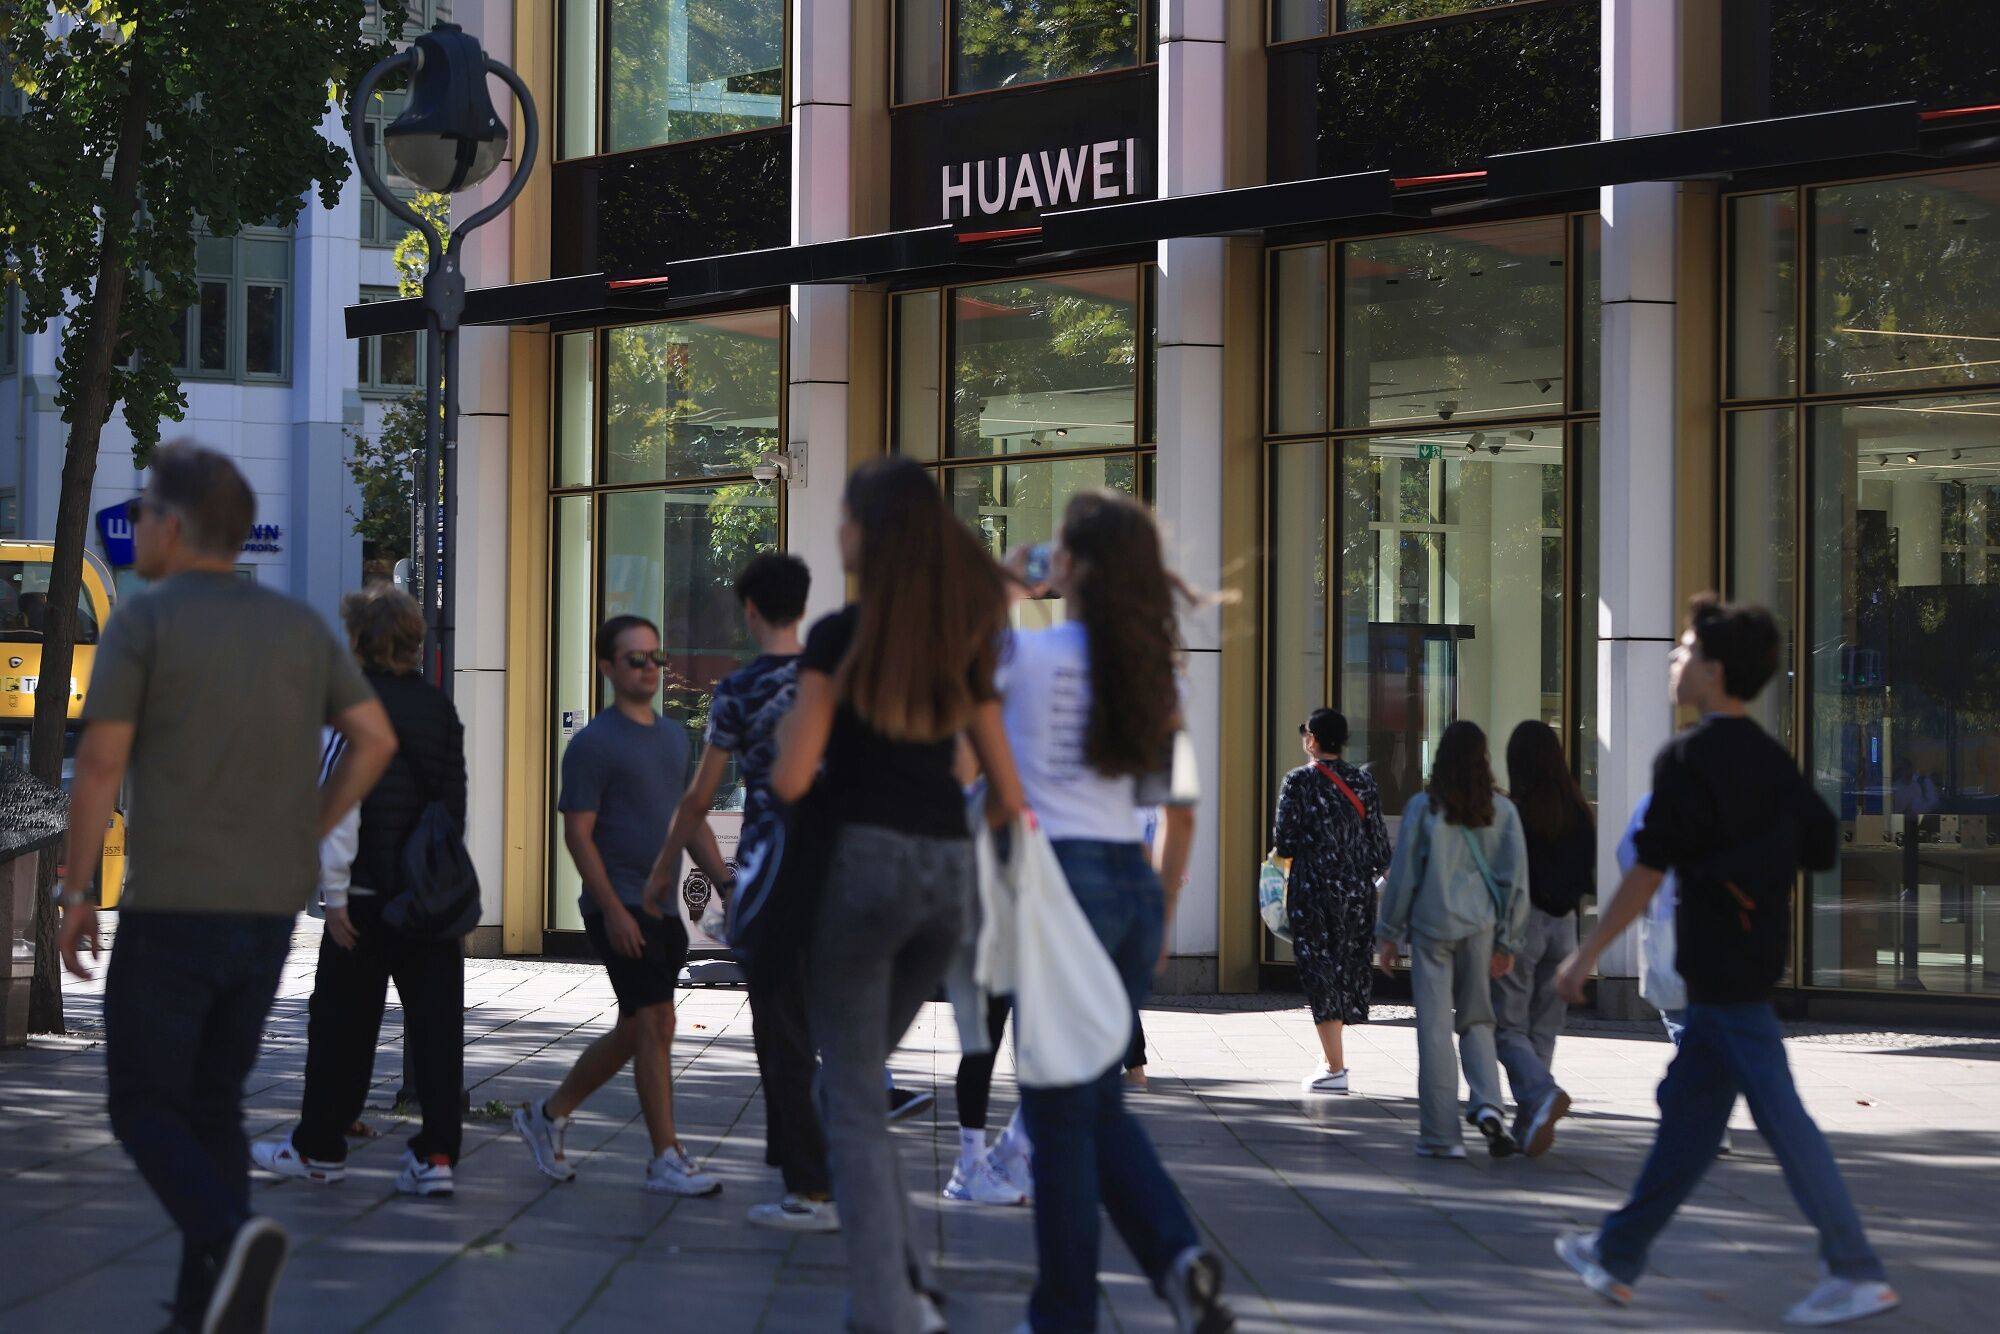 Pedestrians outside a Huawei store in Berlin, Germany. Photo: Bloomberg